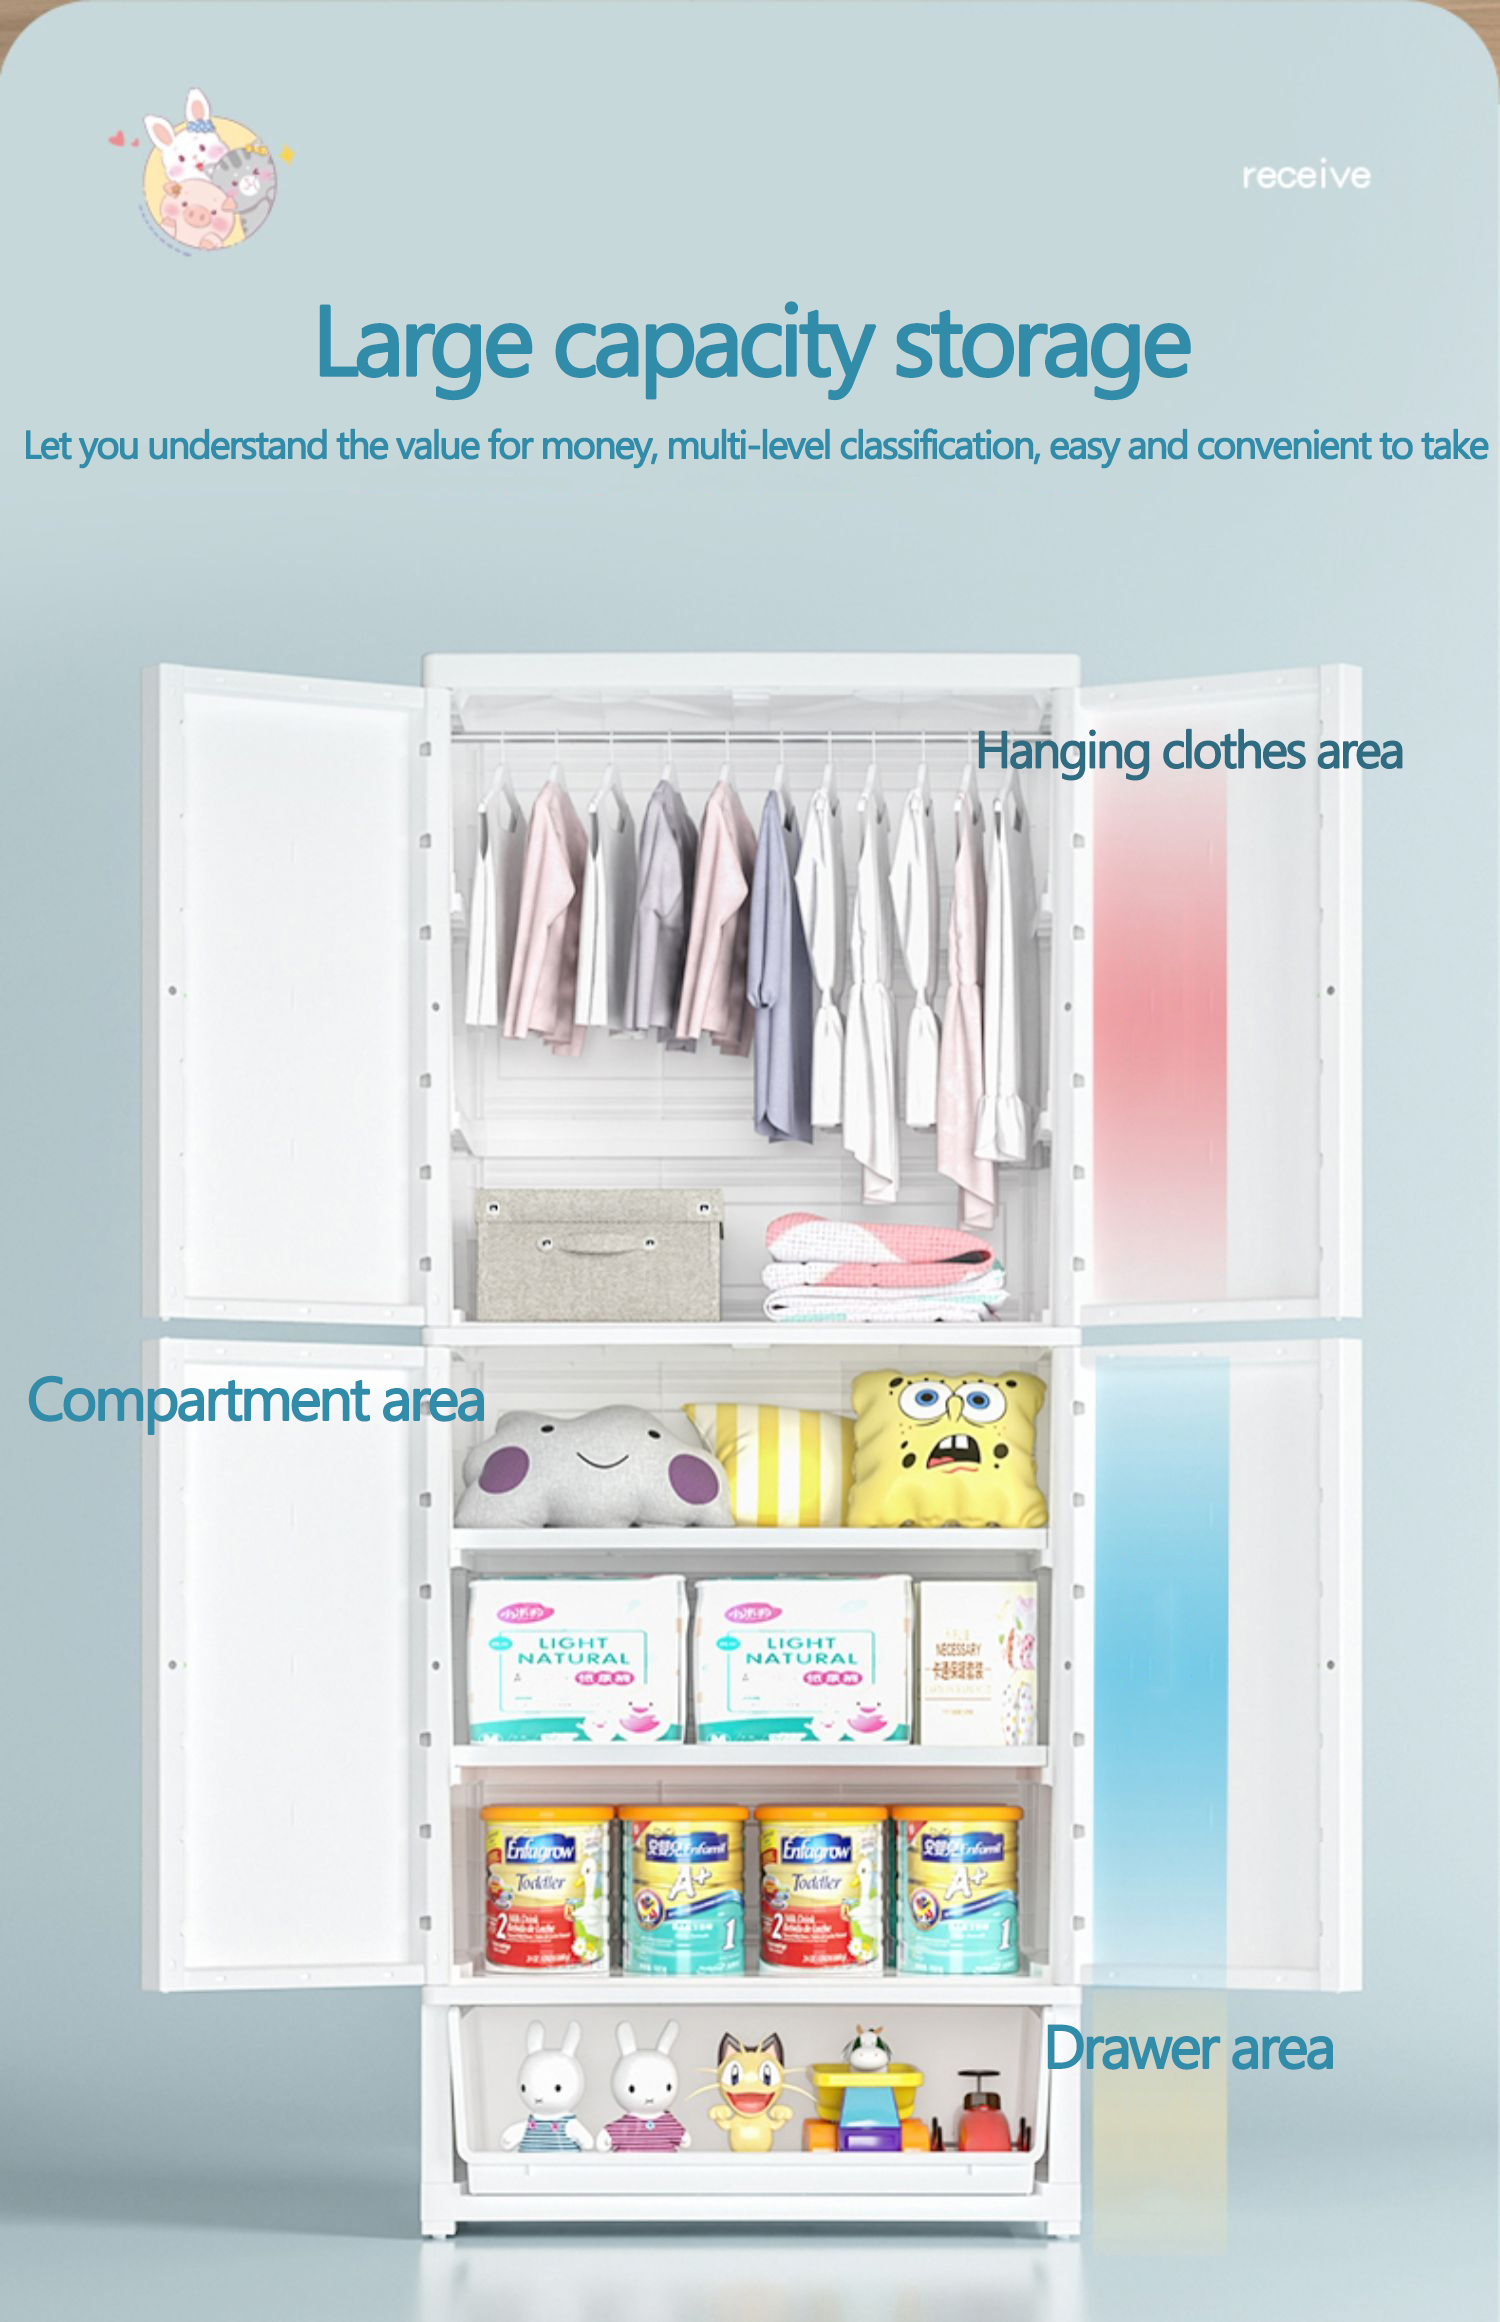 Wardrobe Storage Cabinet with Drawers Cupboard Plastic Factory Direct Cartoon Chest of Drawers Double Door Baby Wardrobe Kids